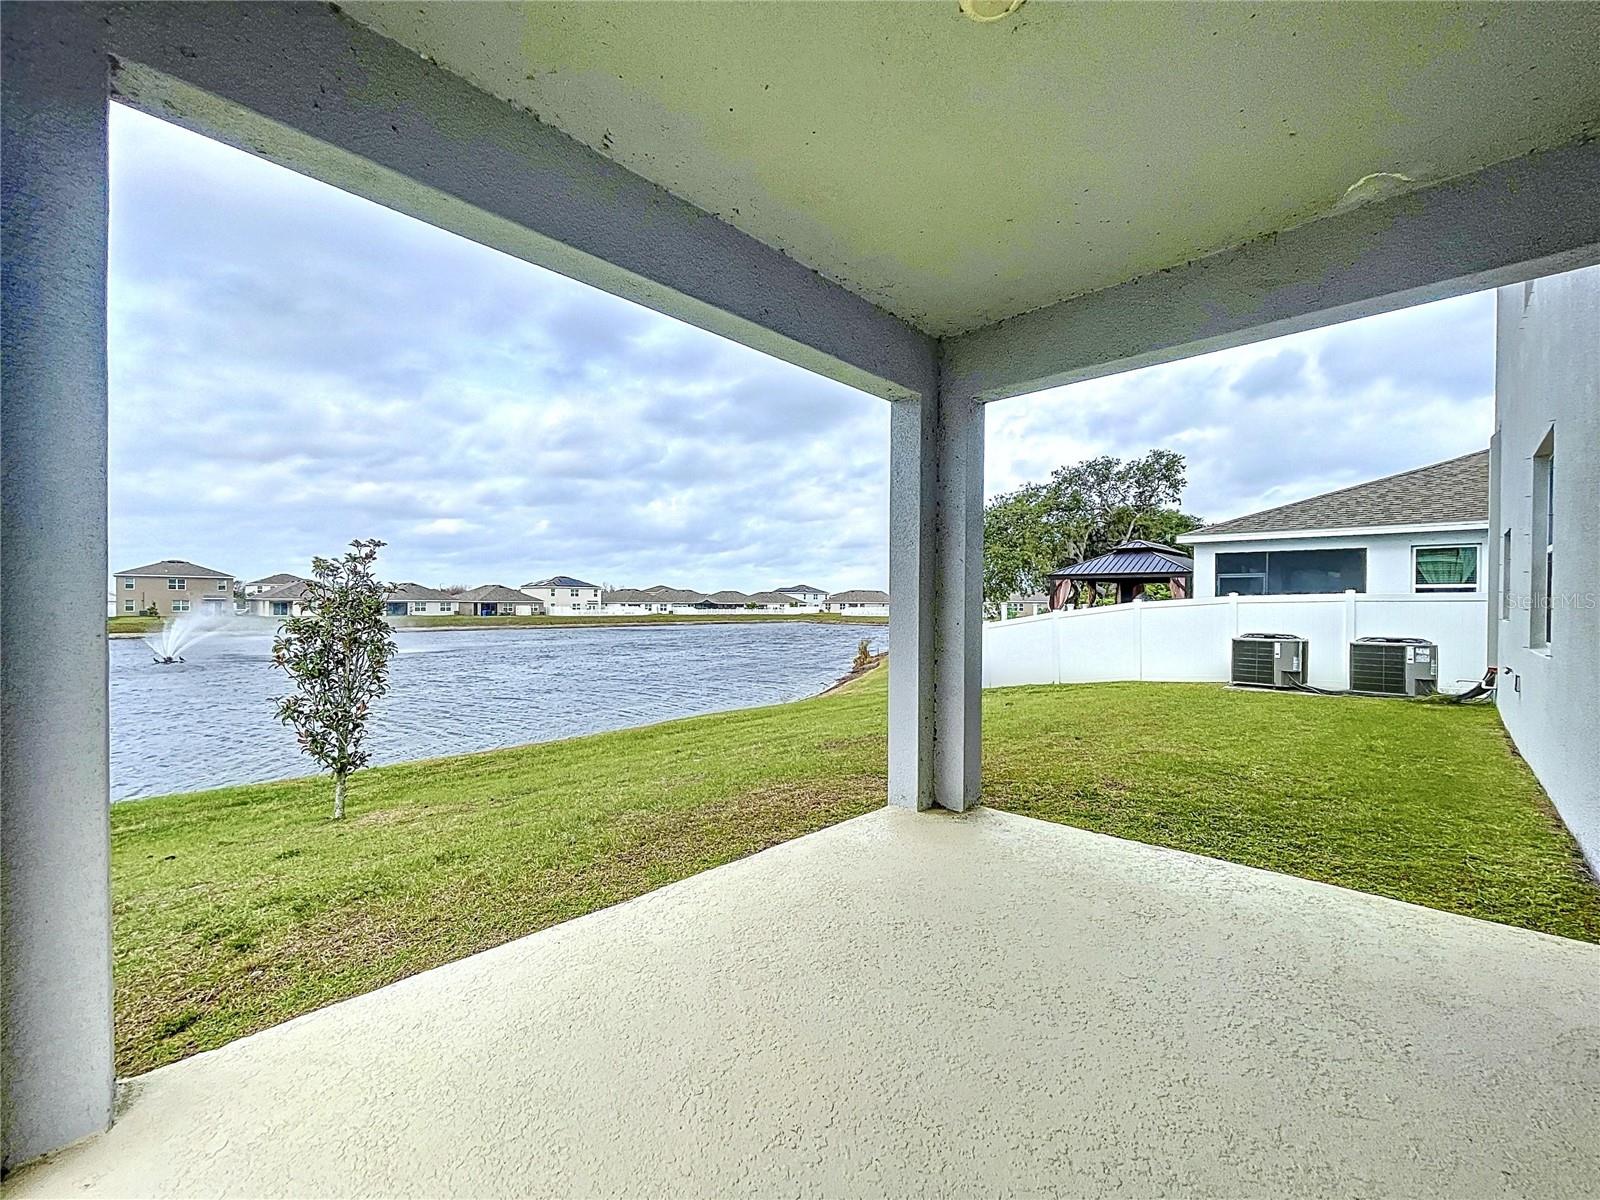 Covered Lanai with Pond View